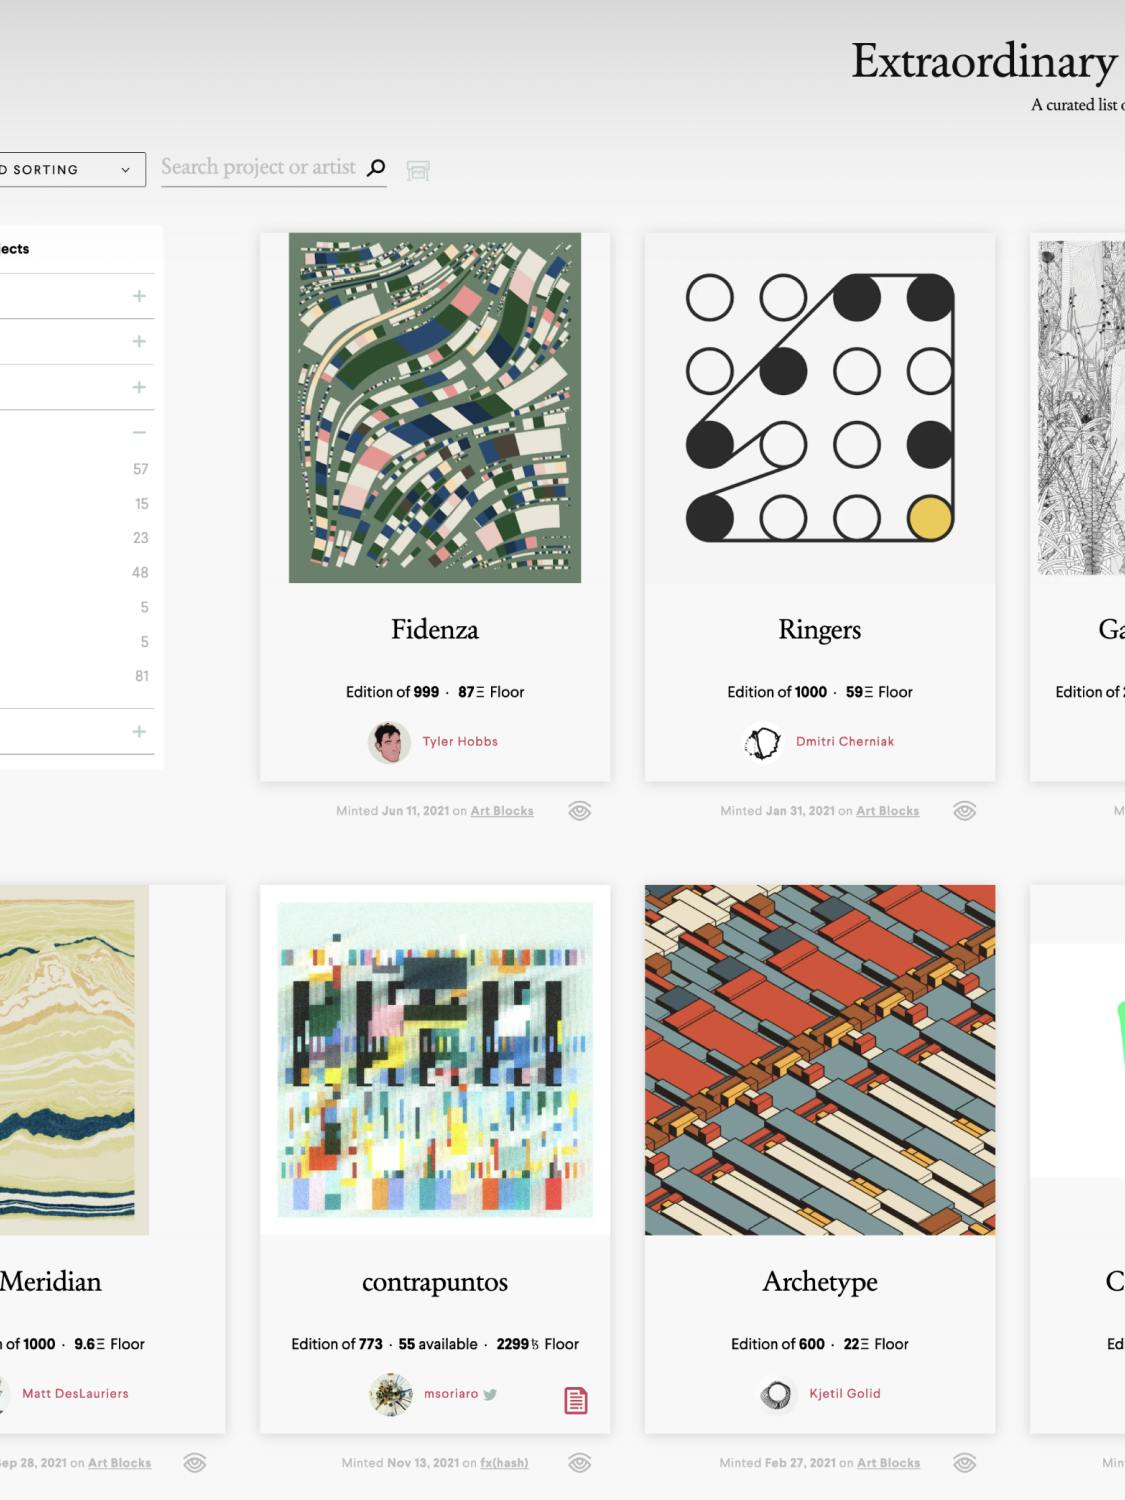 Our essential curation of iconic
long-form generative artworks.